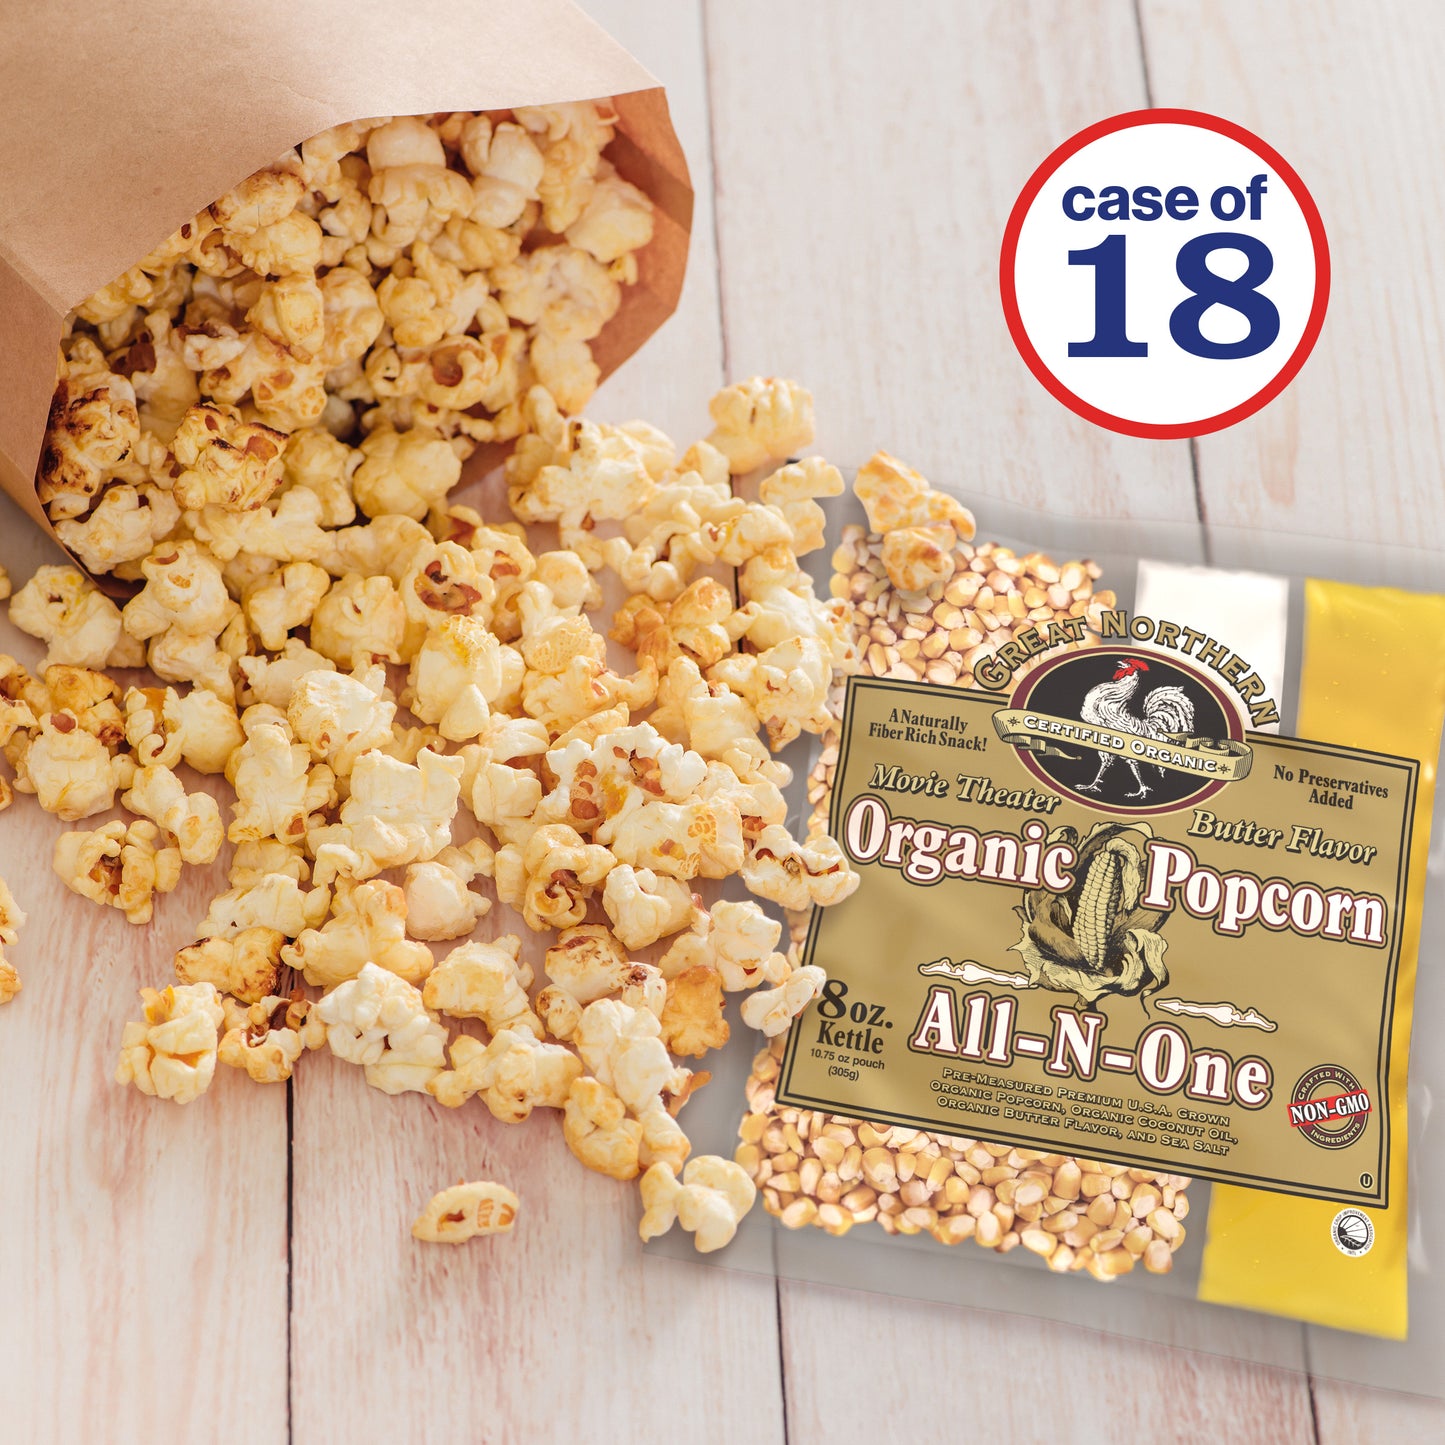 8 Ounce Organic Popcorn, Salt and Oil All-in-One Packets - Case of 18